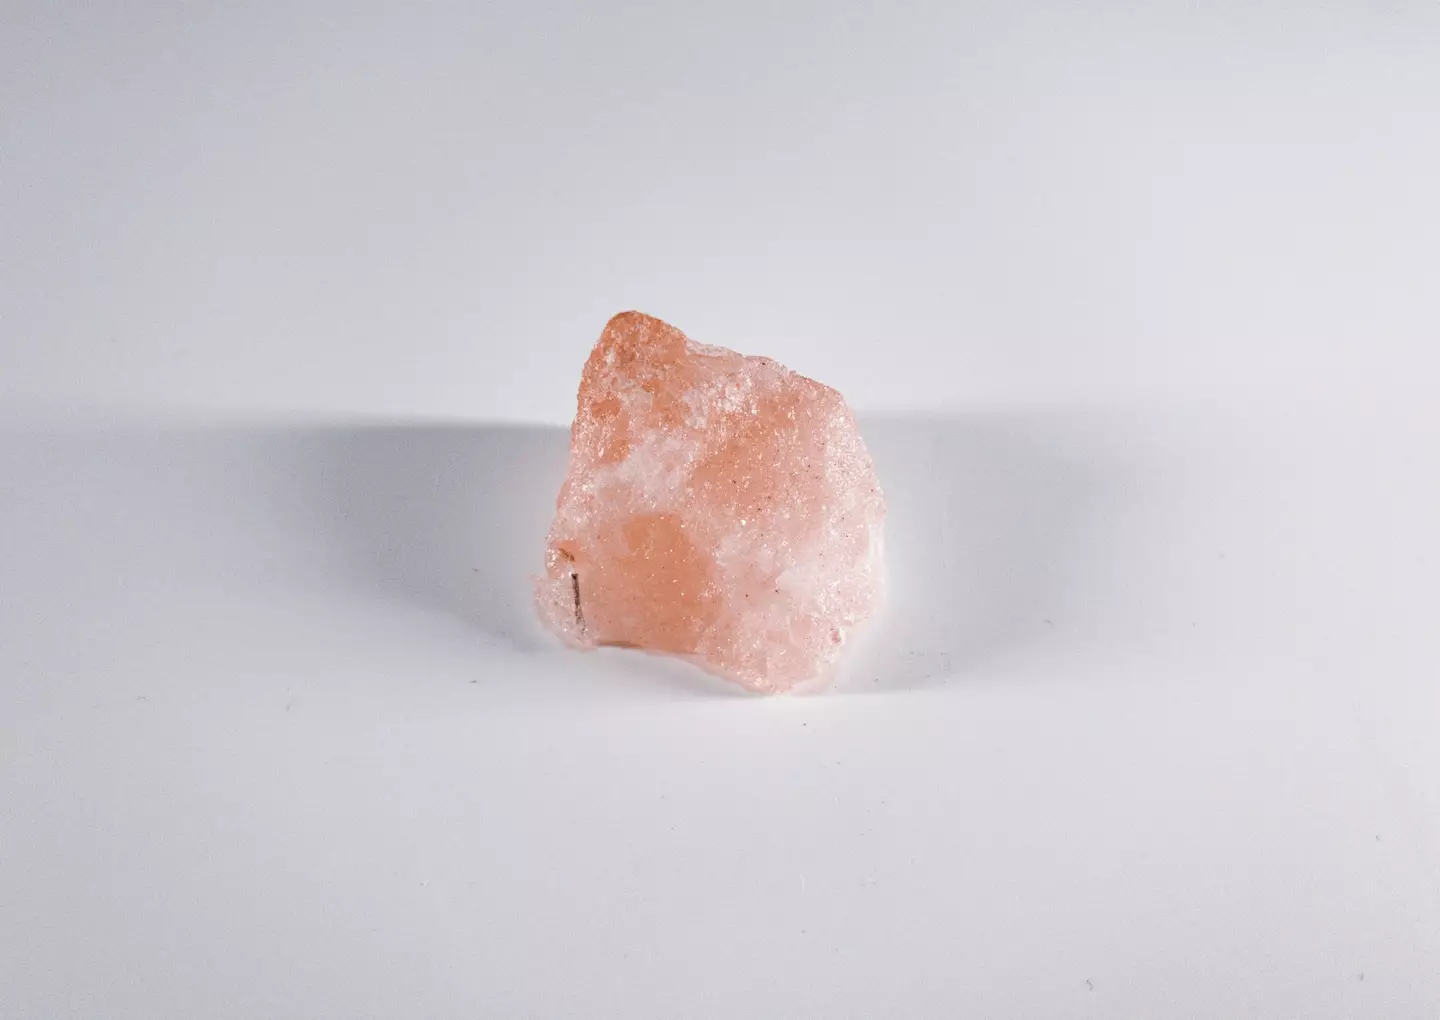 Rose Quartz and Carnelian crystals are perfect for promoting attraction. [